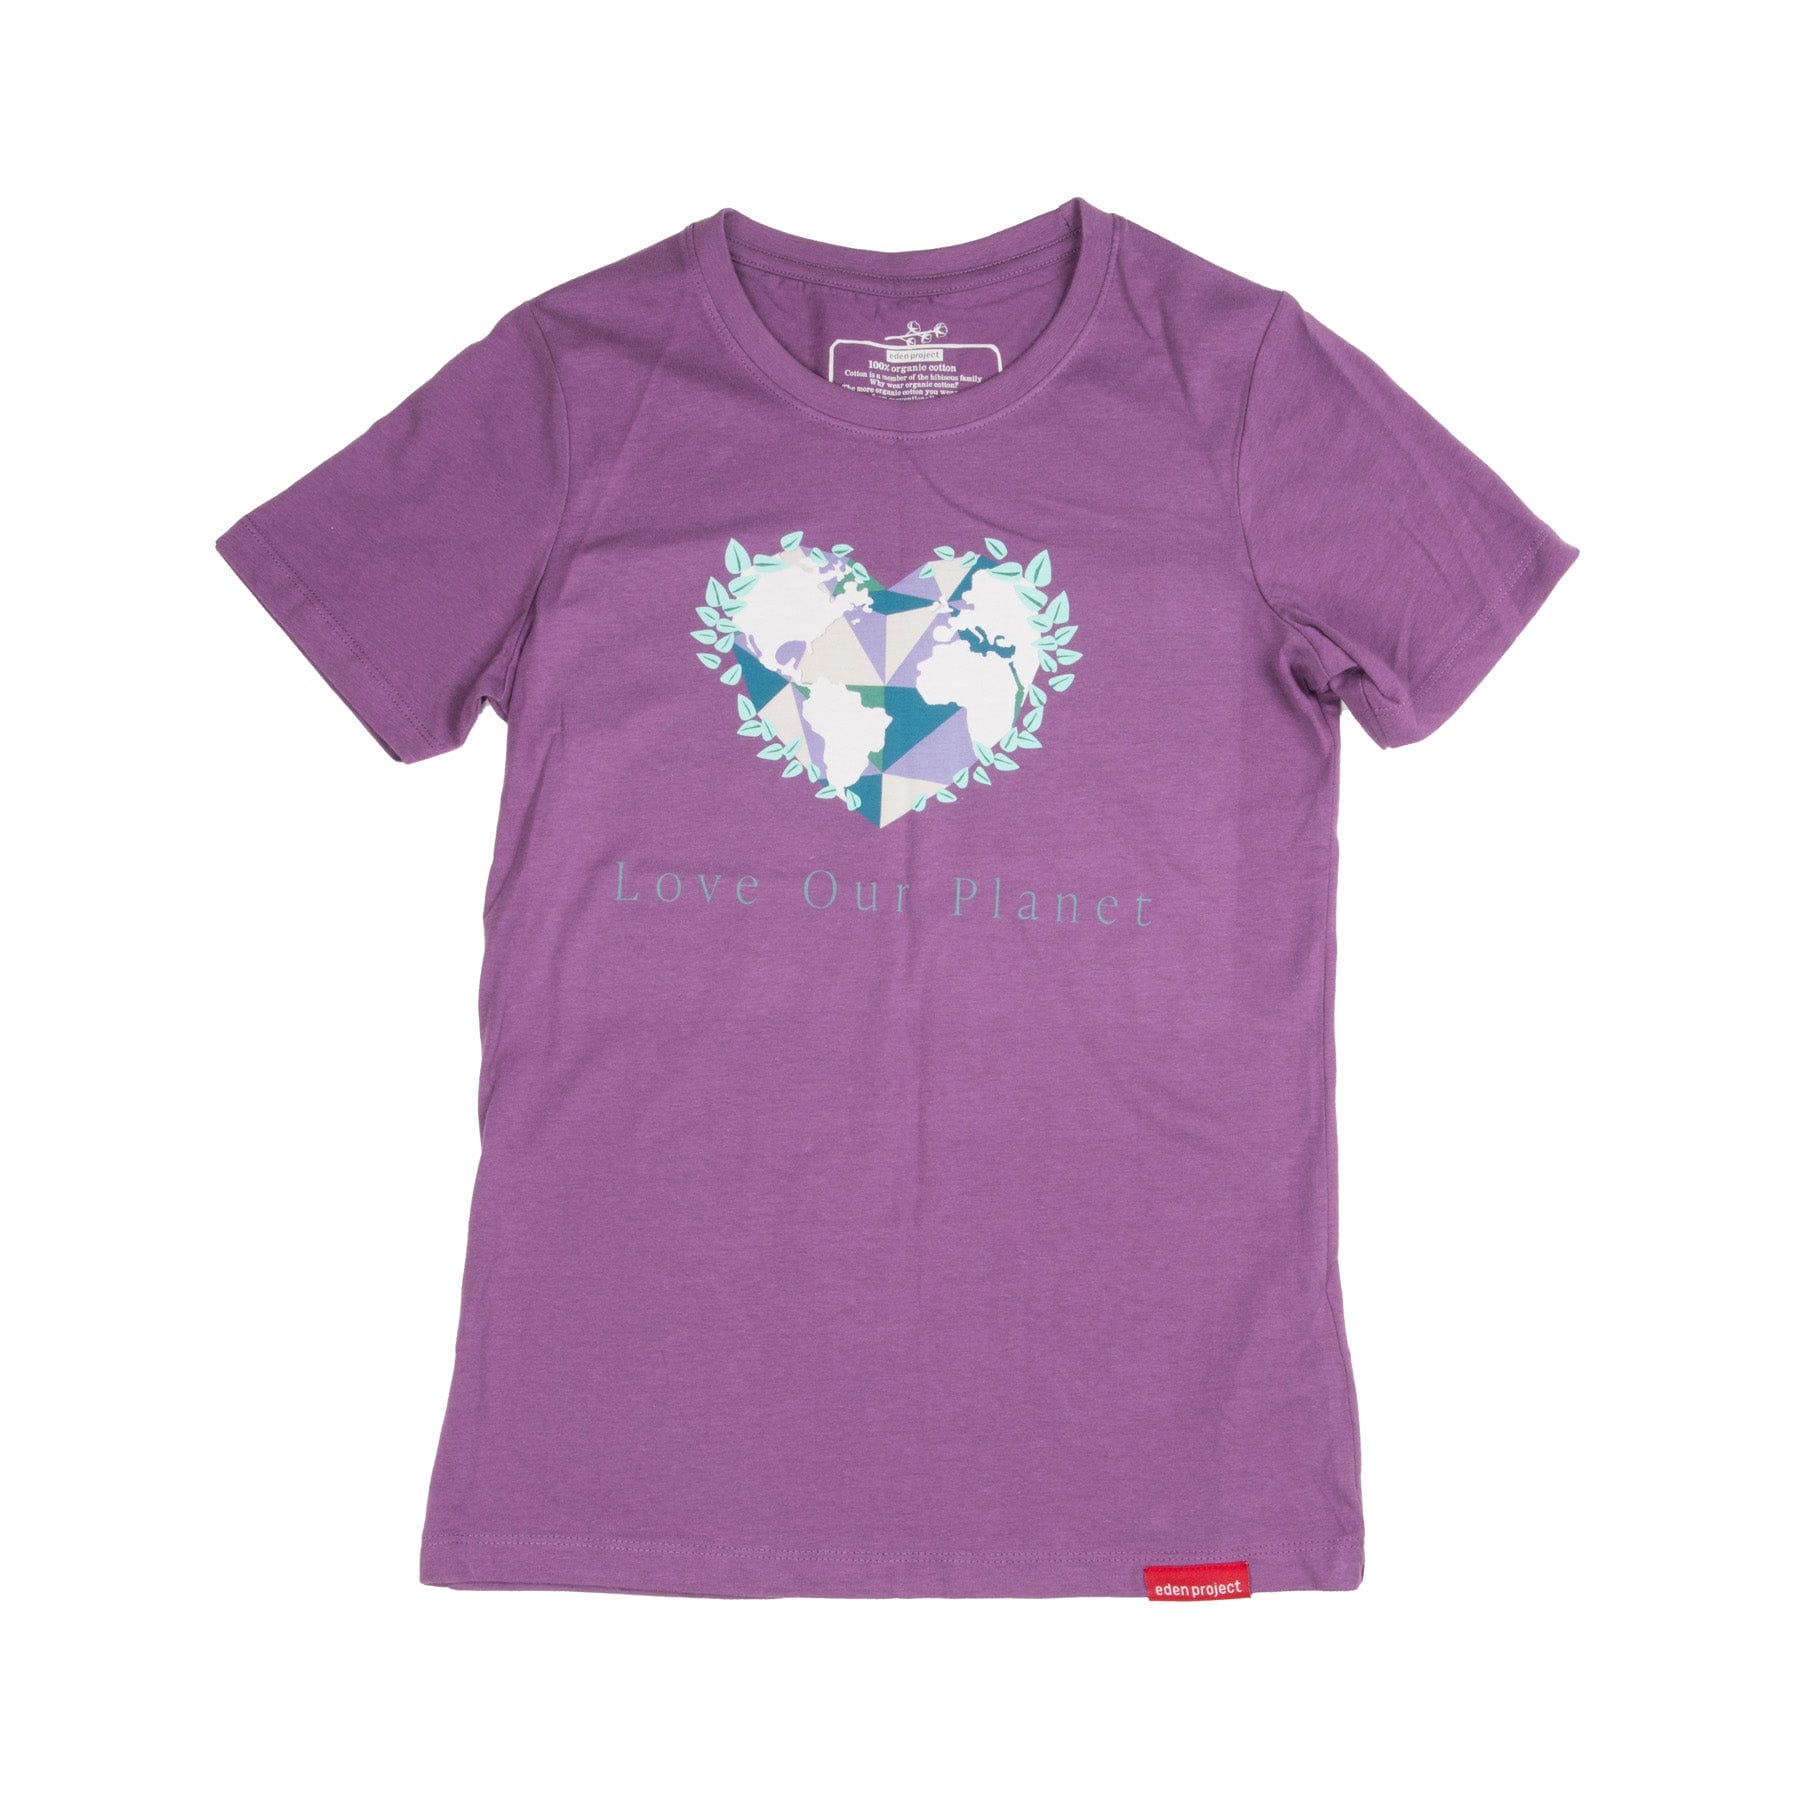 Purple t-shirt with eco-friendly design featuring a heart-shaped Earth surrounded by leaves and the phrase 'Love Our Planet' displayed on a white background.